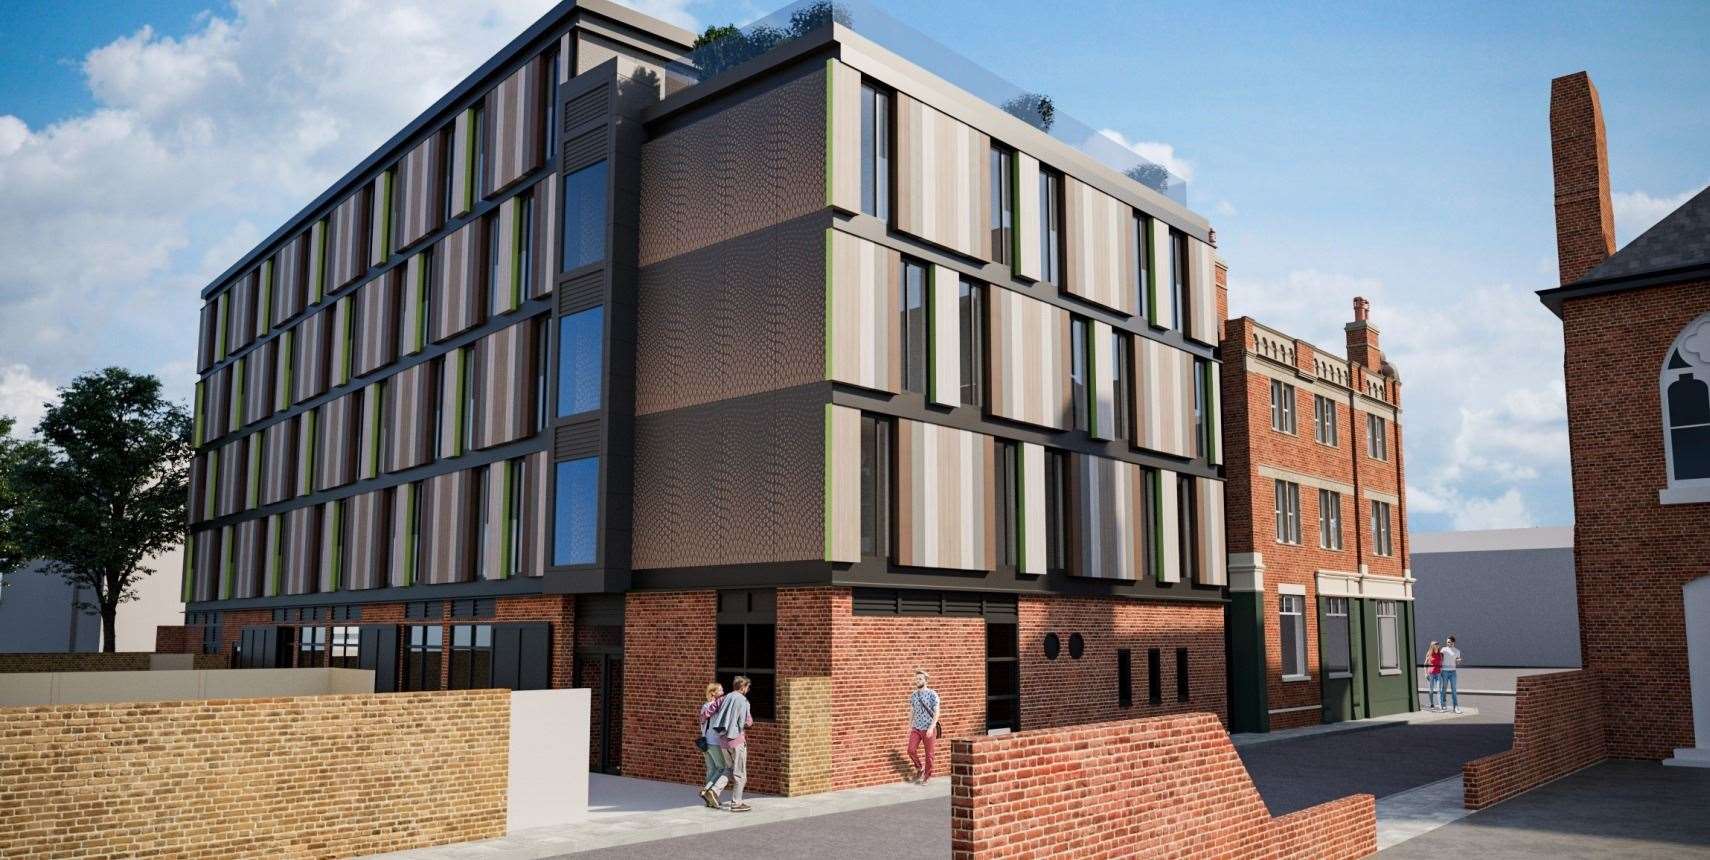 An artist's impression of Rochester Independent College's student accommodation block from the rear of the building. Picture: Clague Architects